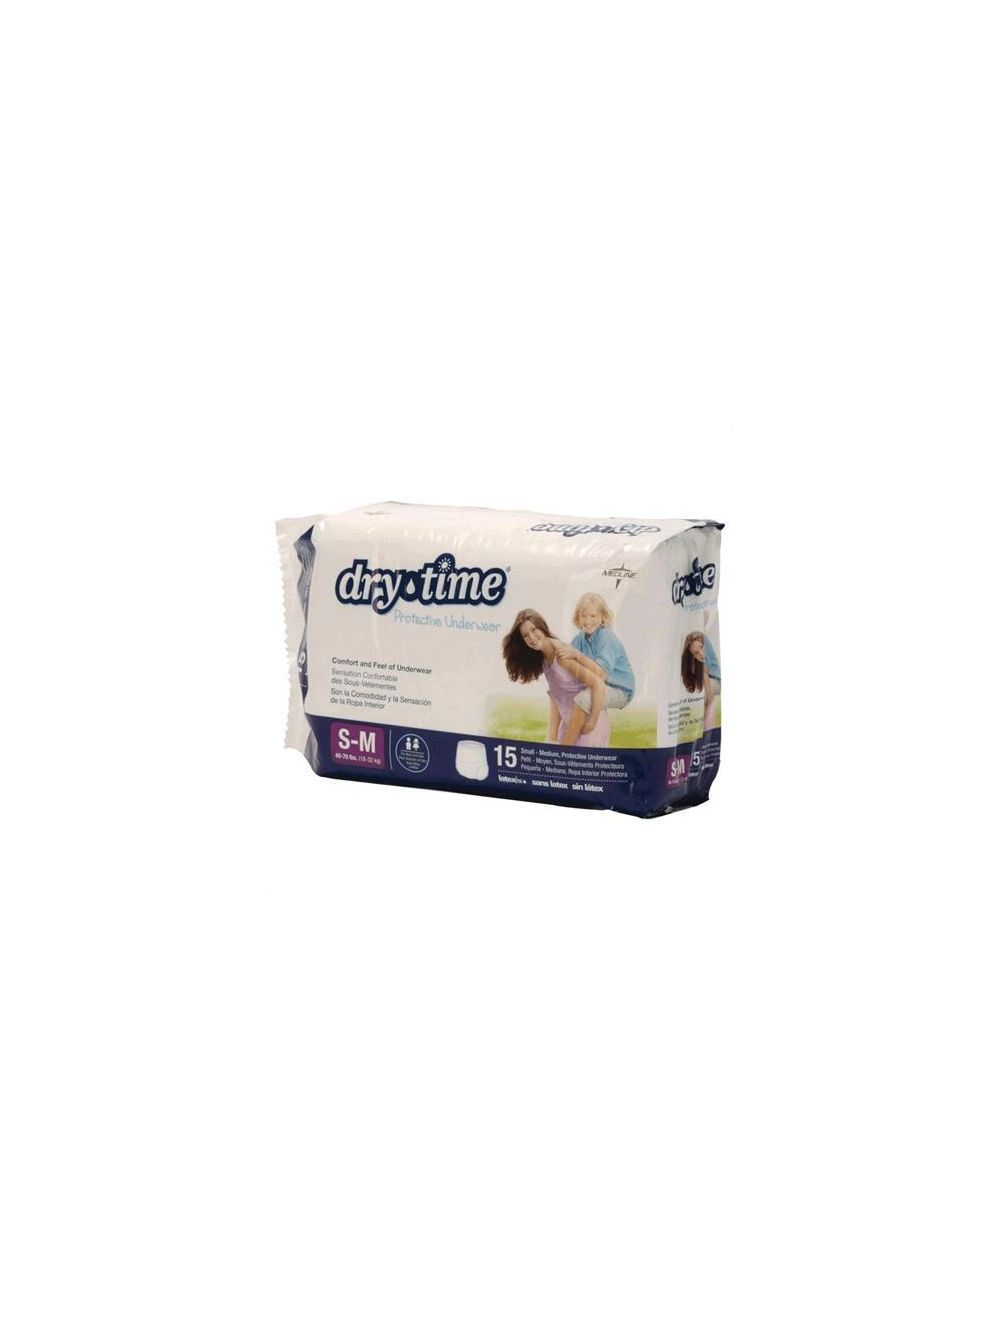  Medline Drytime Disposable Protective Youth Underwear